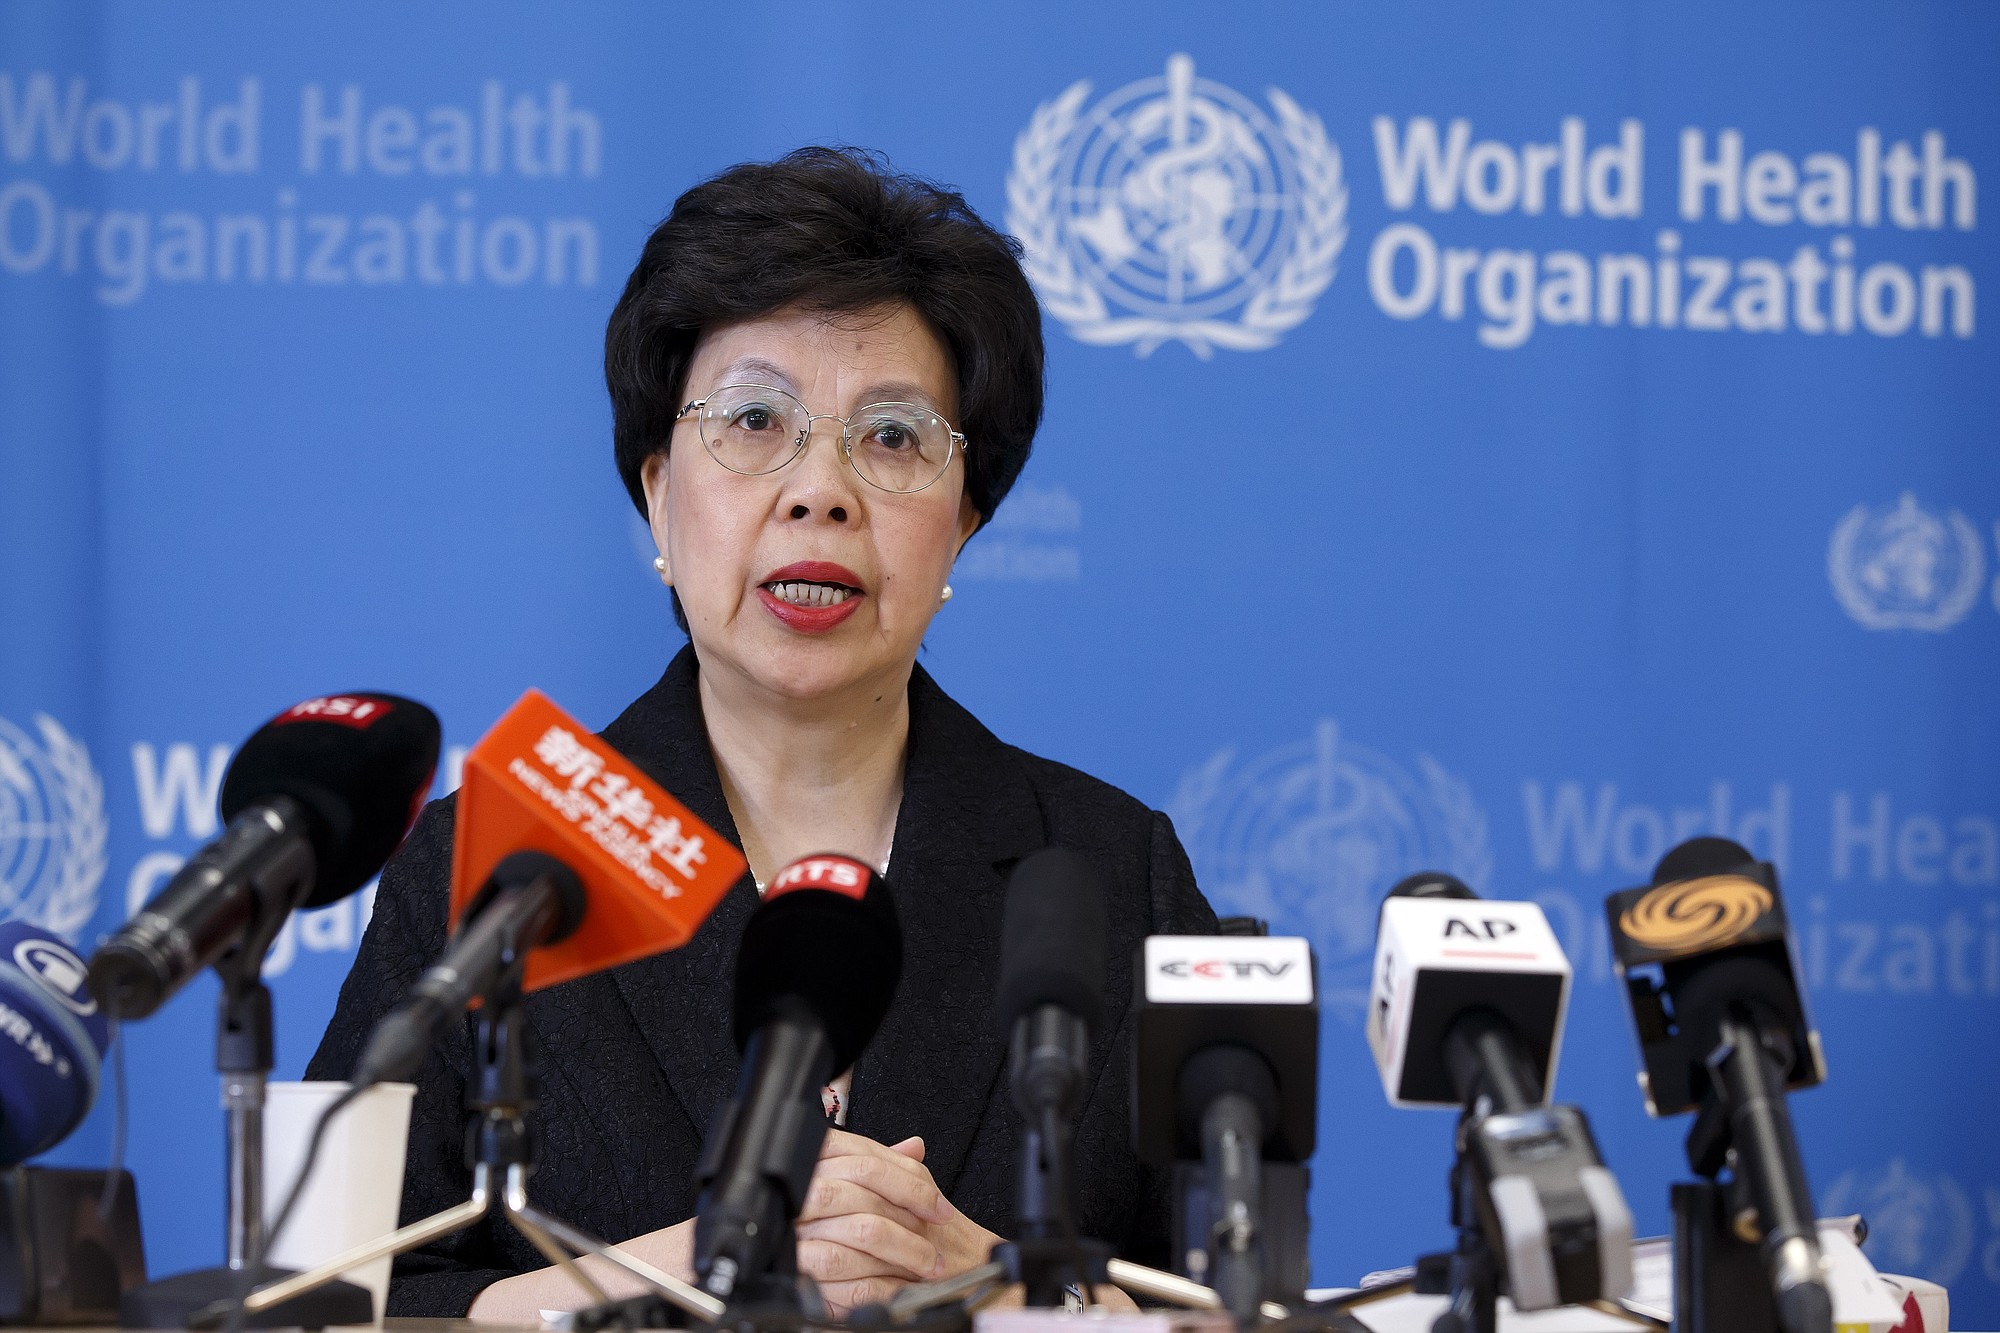 Director General of the World Health Organization, WHO, China's Margaret Chan informs to the media after an emergency meeting on Ebola during a press conference at the headquarters of the WHO in Geneva, Switzerland, Friday, Aug. 8, 2014.